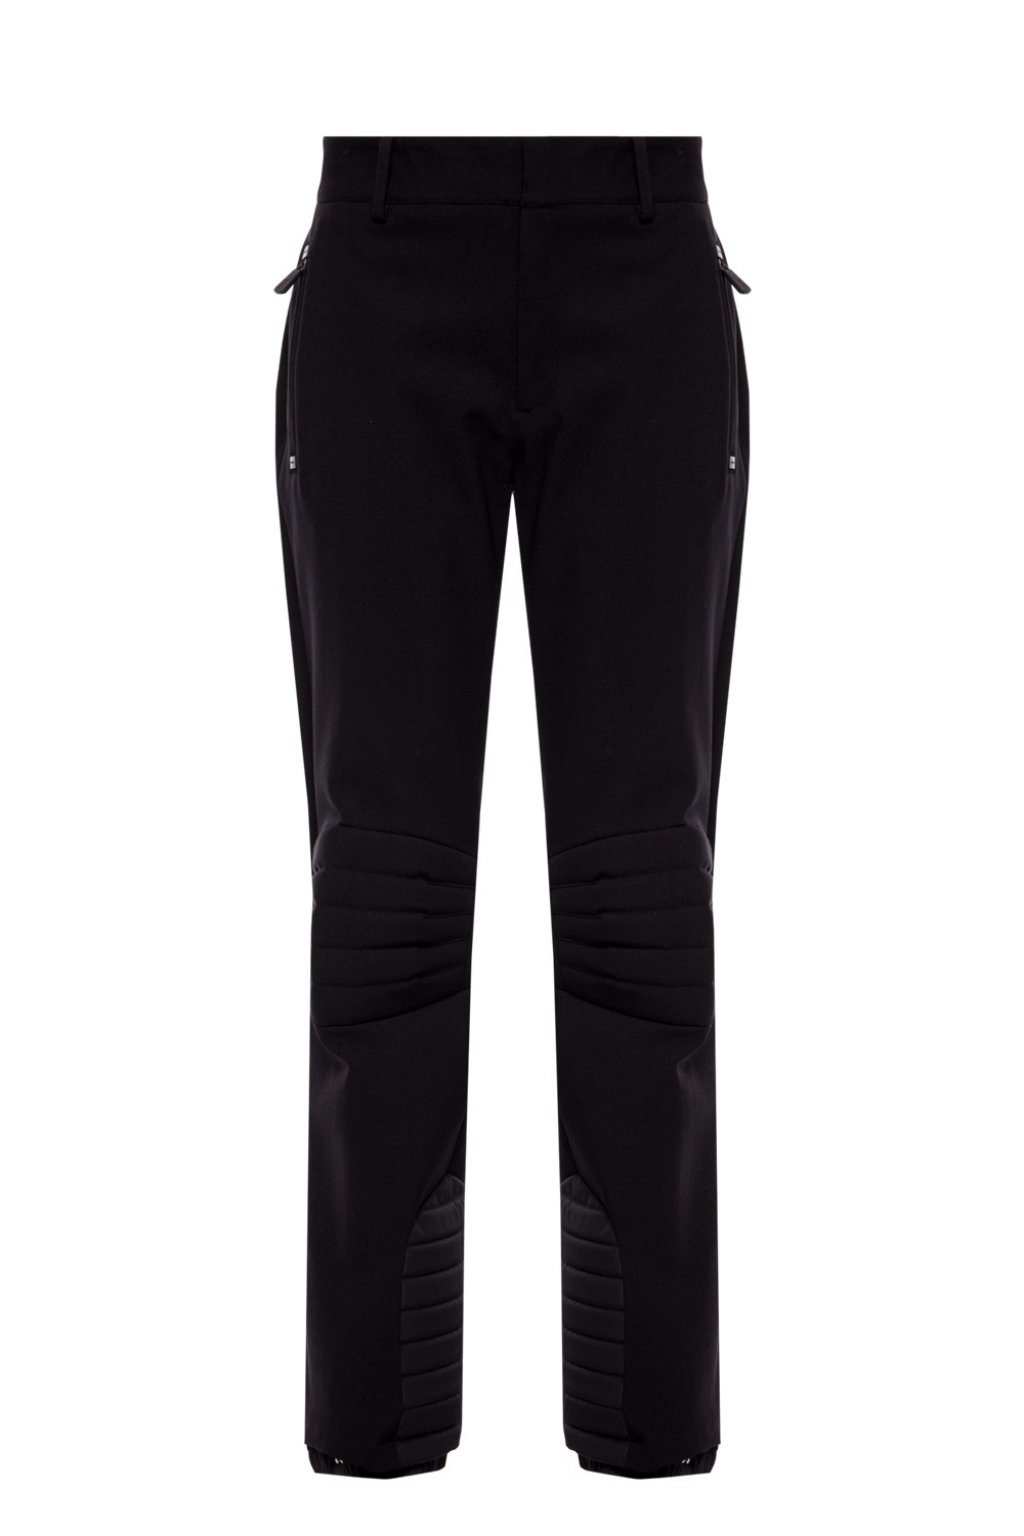 Moncler Grenoble Ski trousers with sewn-in zippers